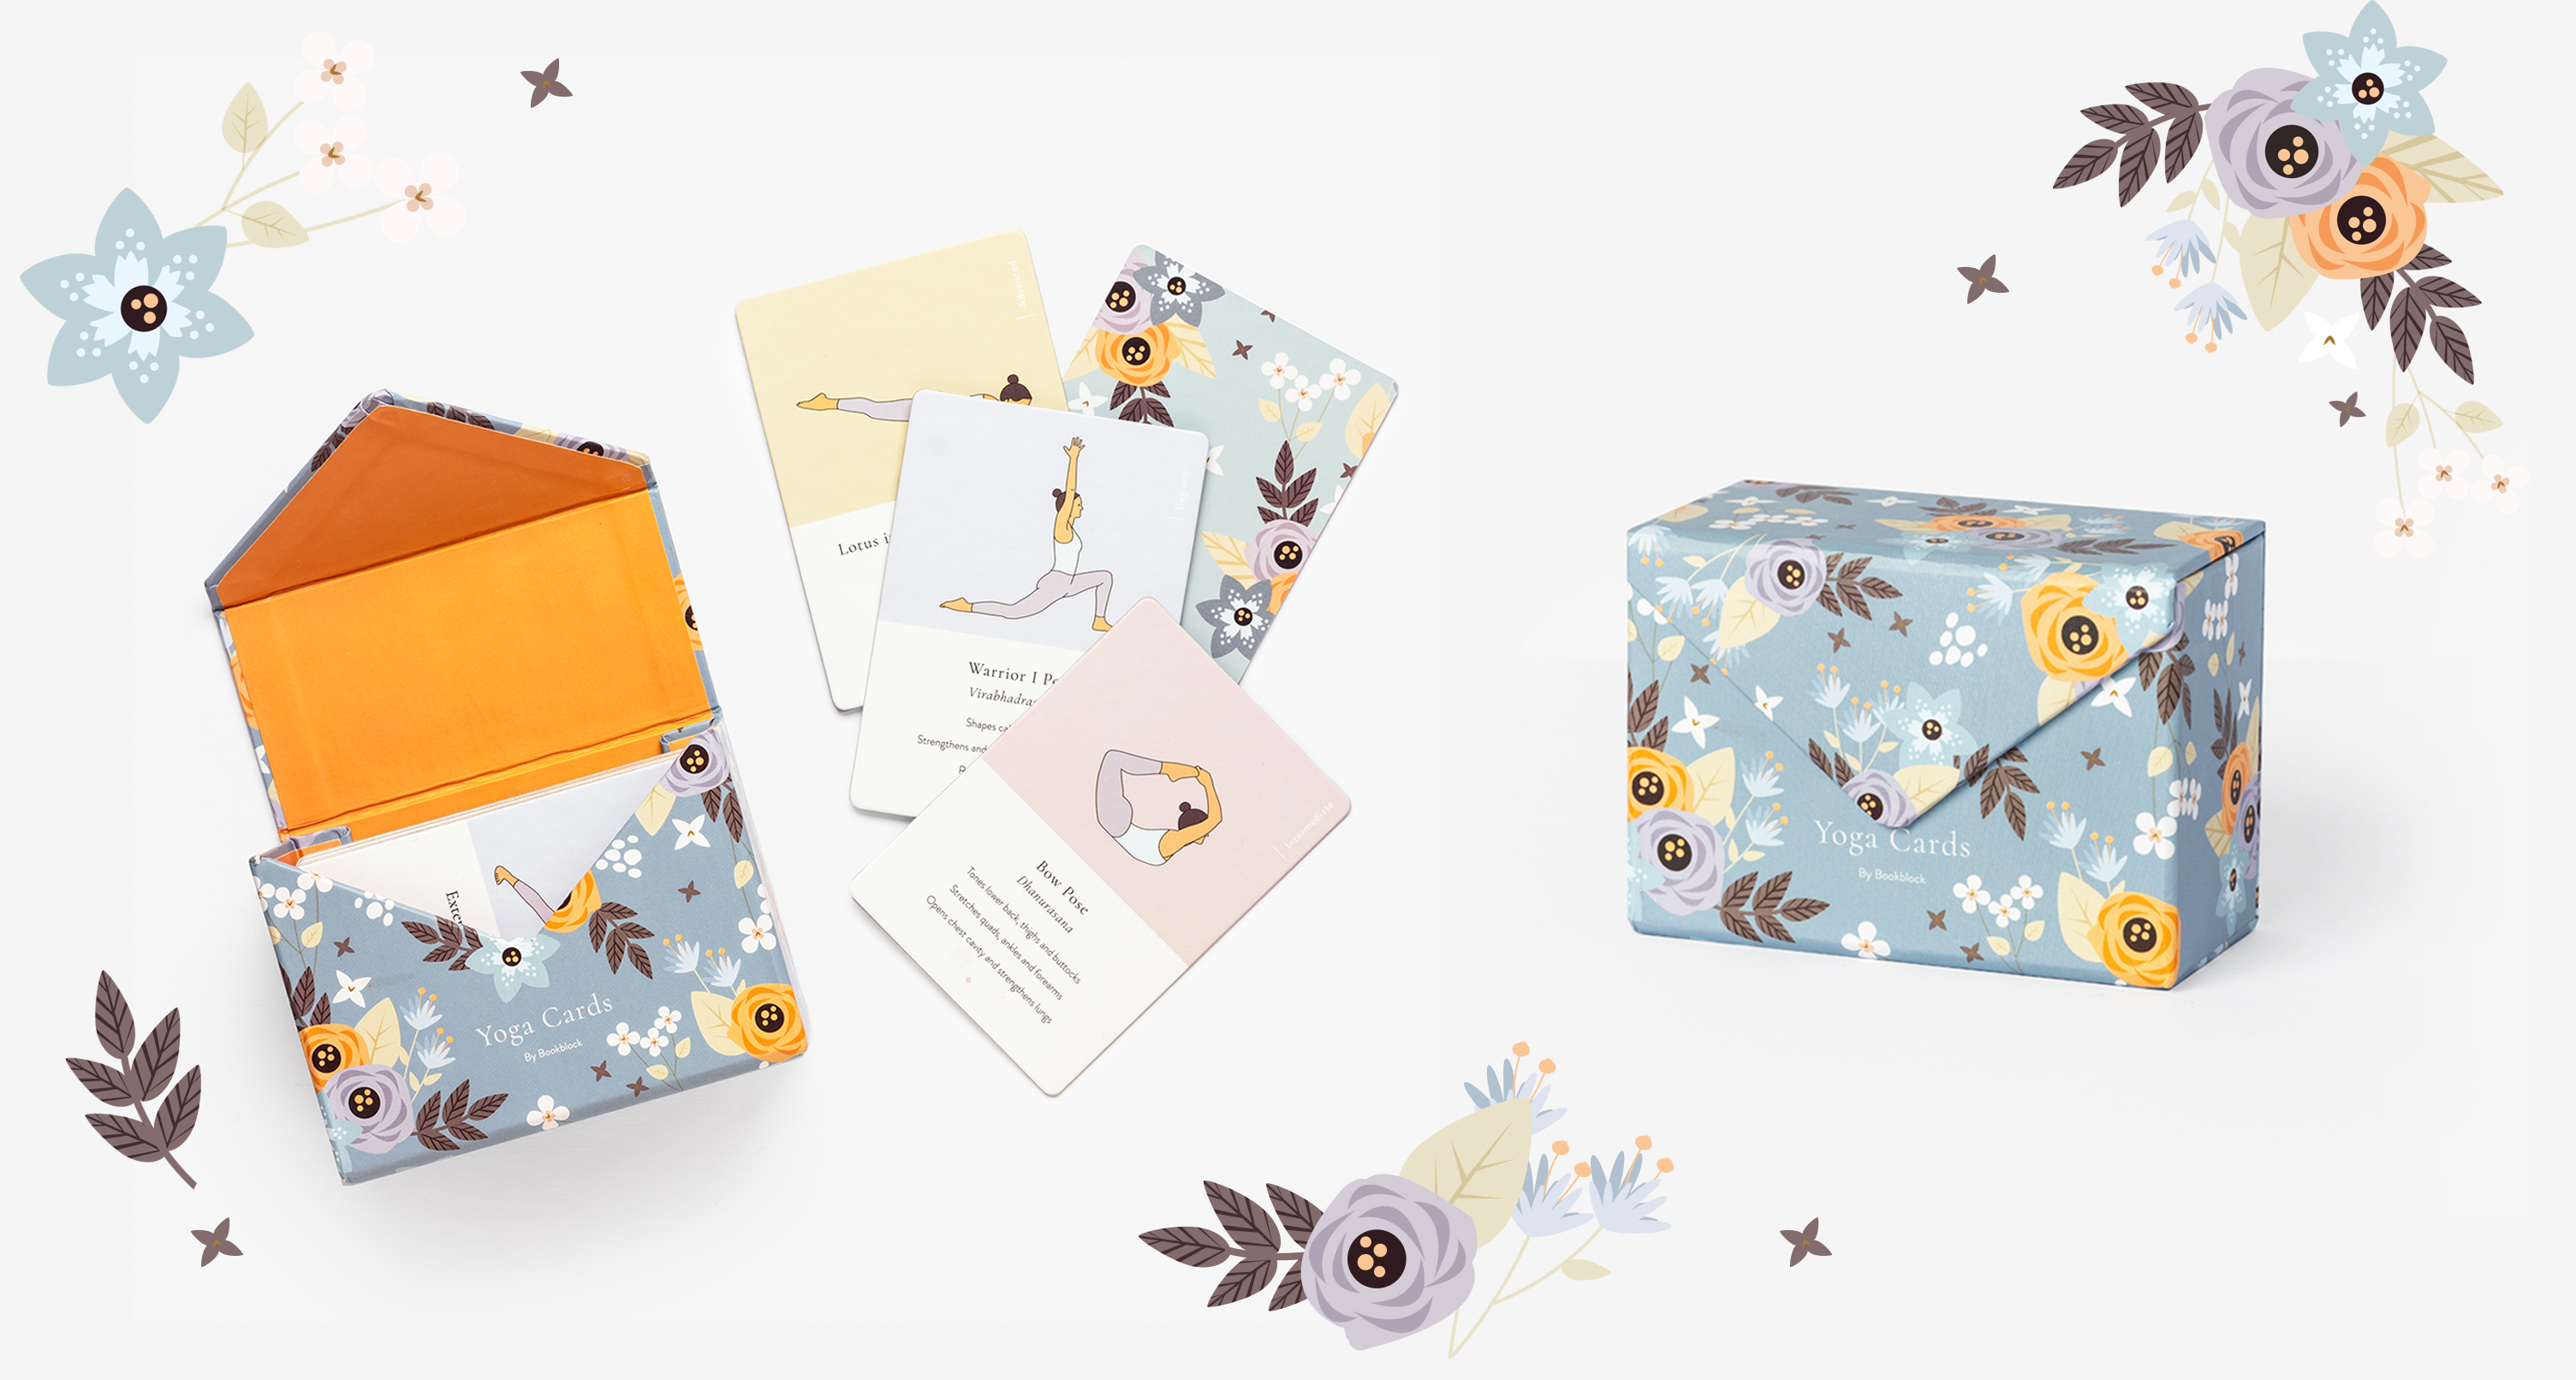 Set of 40 Yoga Cards with floral decoration in blues and oranges